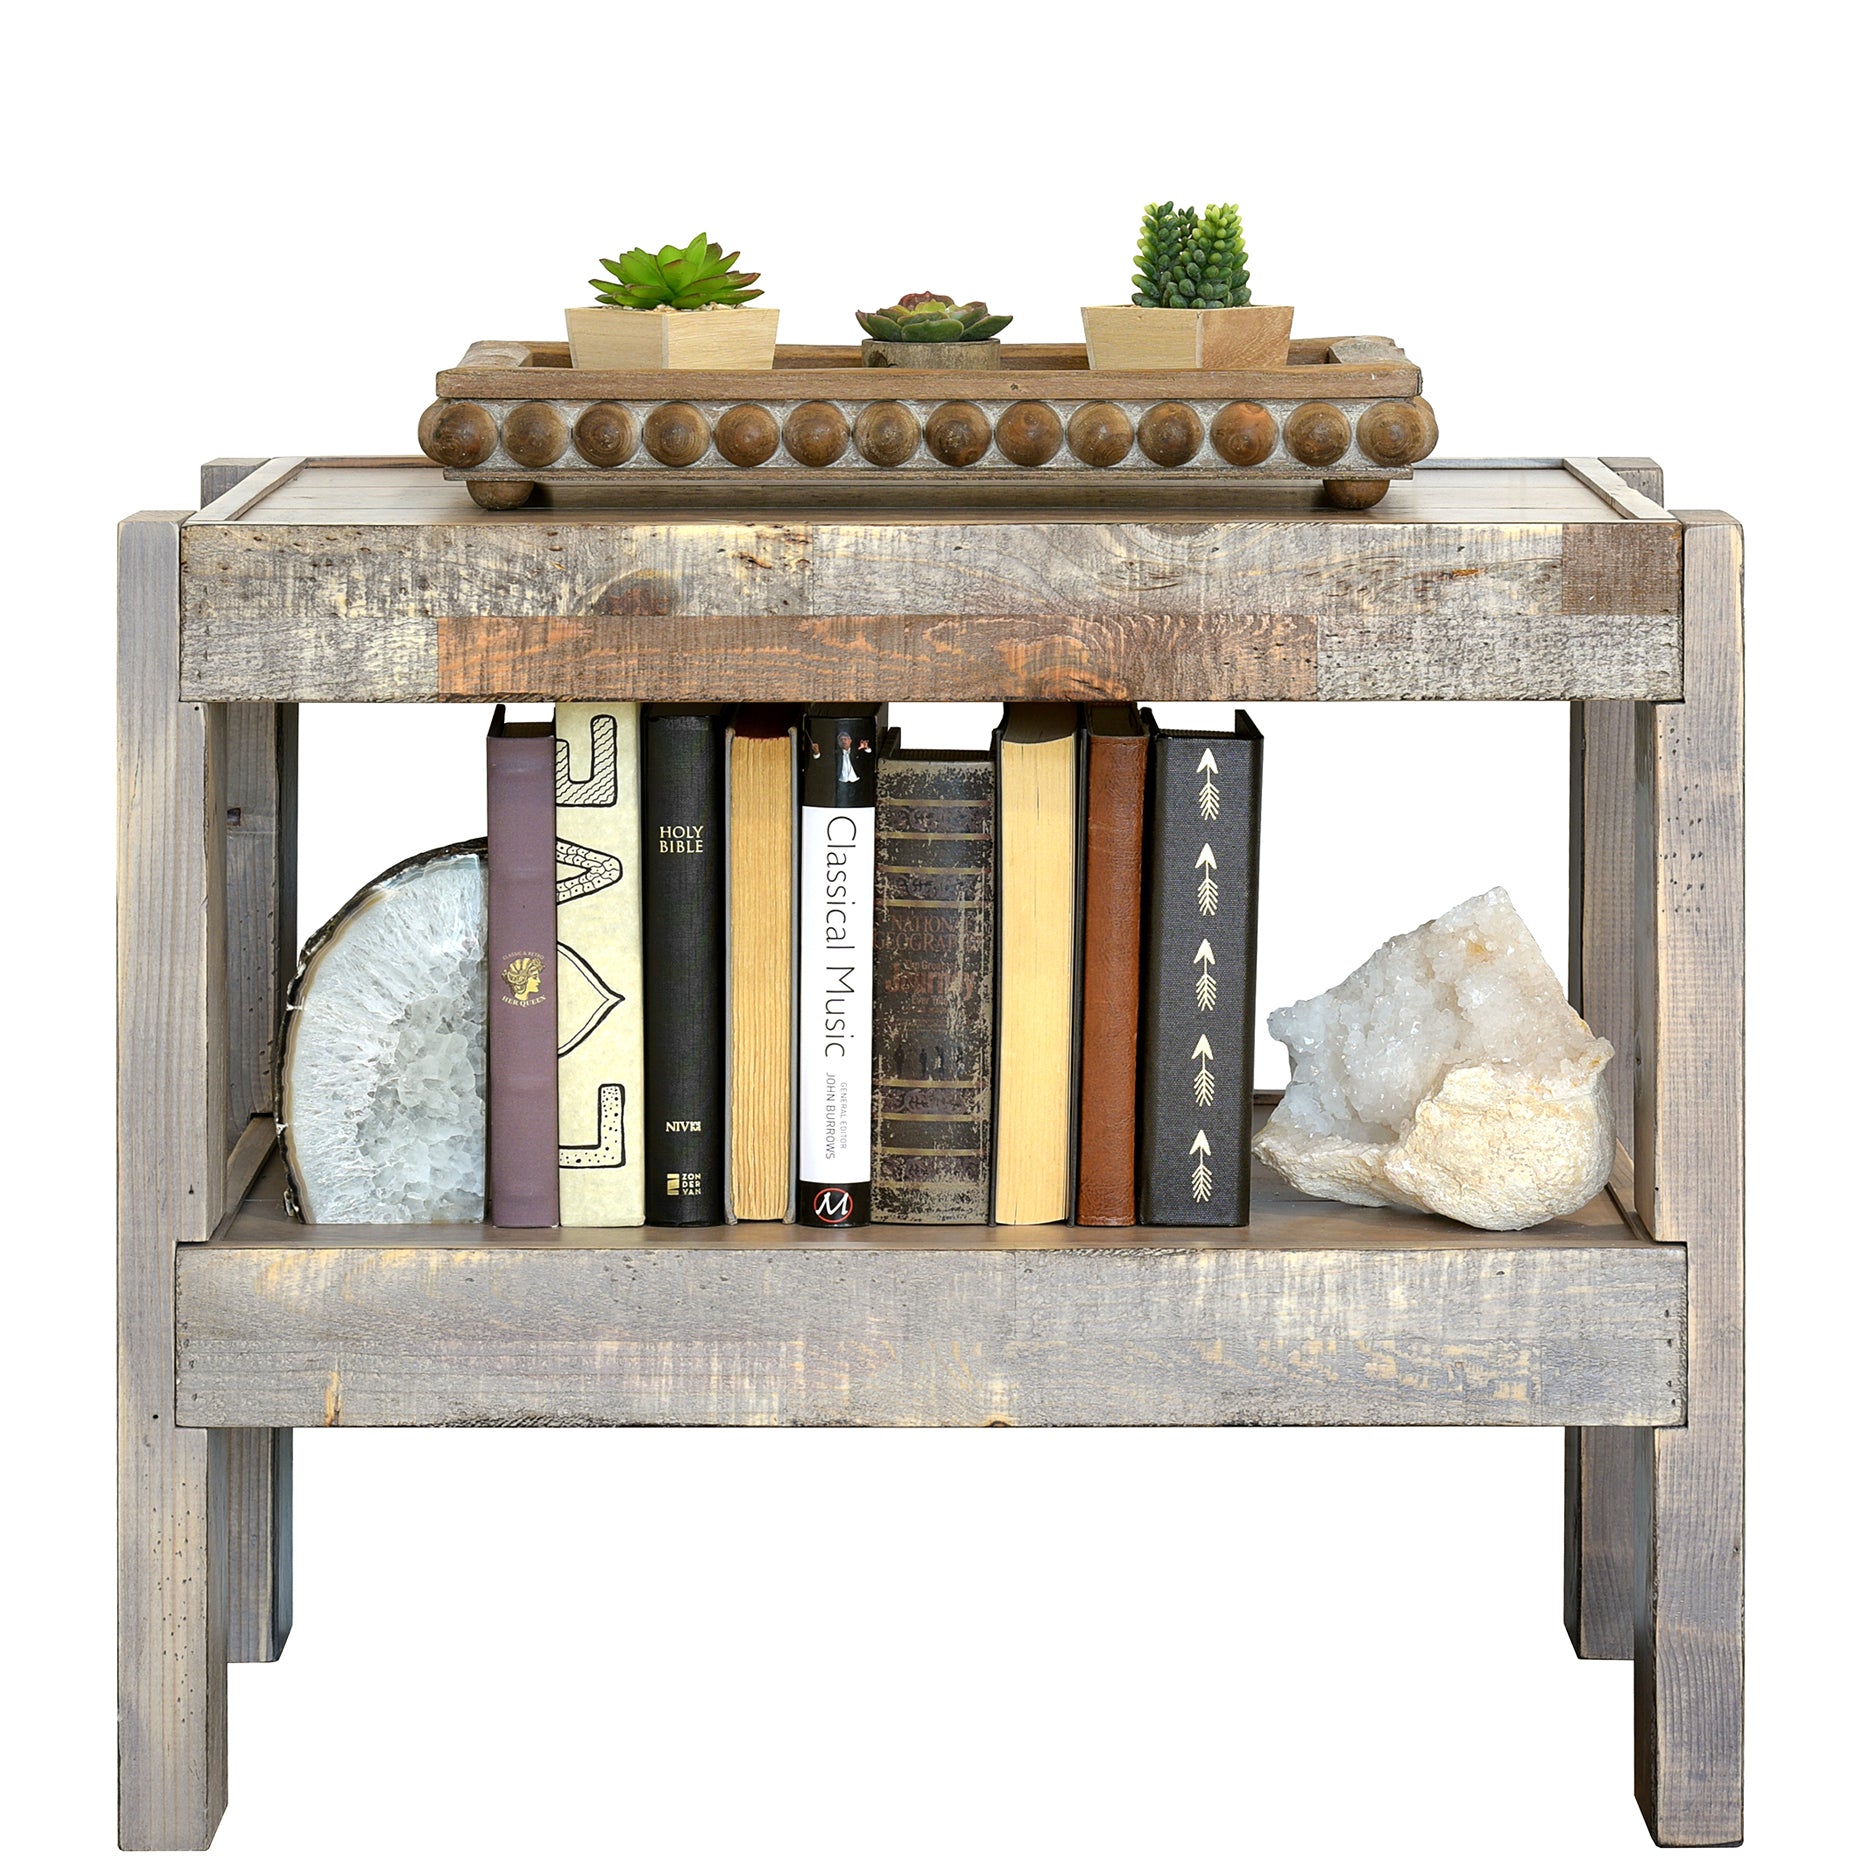 Gray Rustic Reclaimed Pallet Wood Style Beach House Coastal End Table Nightstand - presEARTH  Lakewood